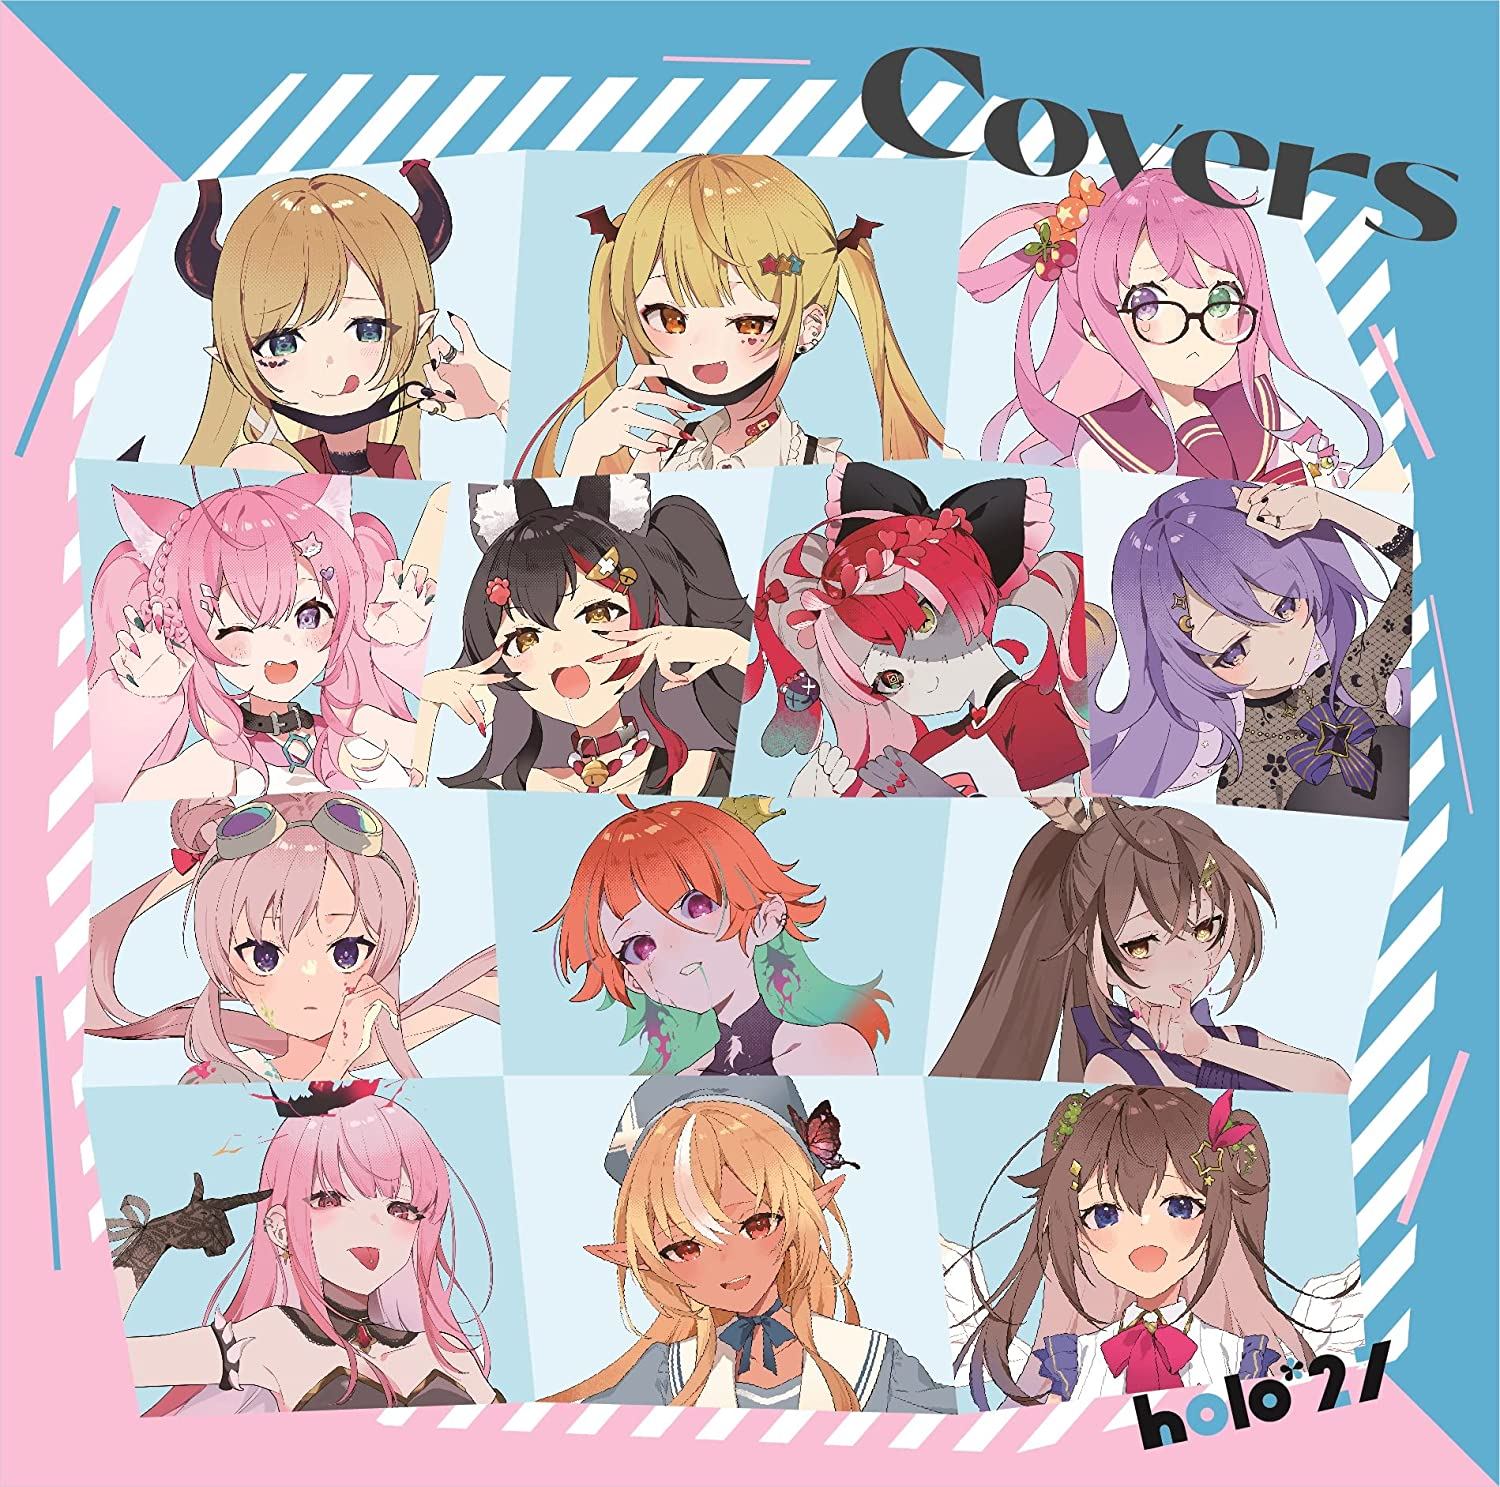 Holo*27 Covers Vol.1 [CD + Goods, Limited Edition] (Holo*27)